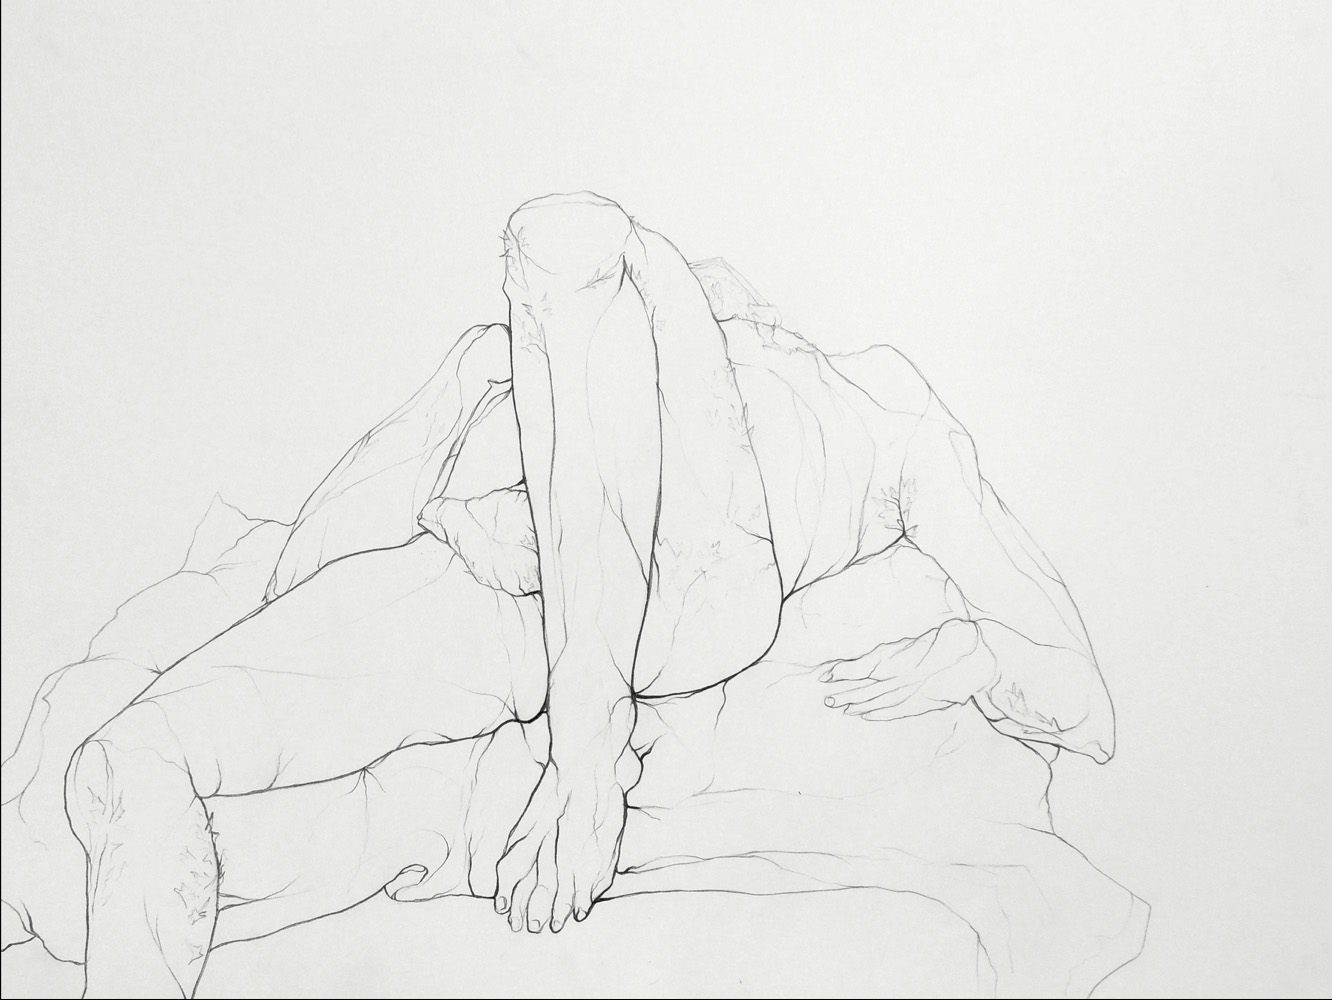  Student: Sarah Meyer Project: “Modulated Contour Line” (Drawing II) Graphite 18”x24” 